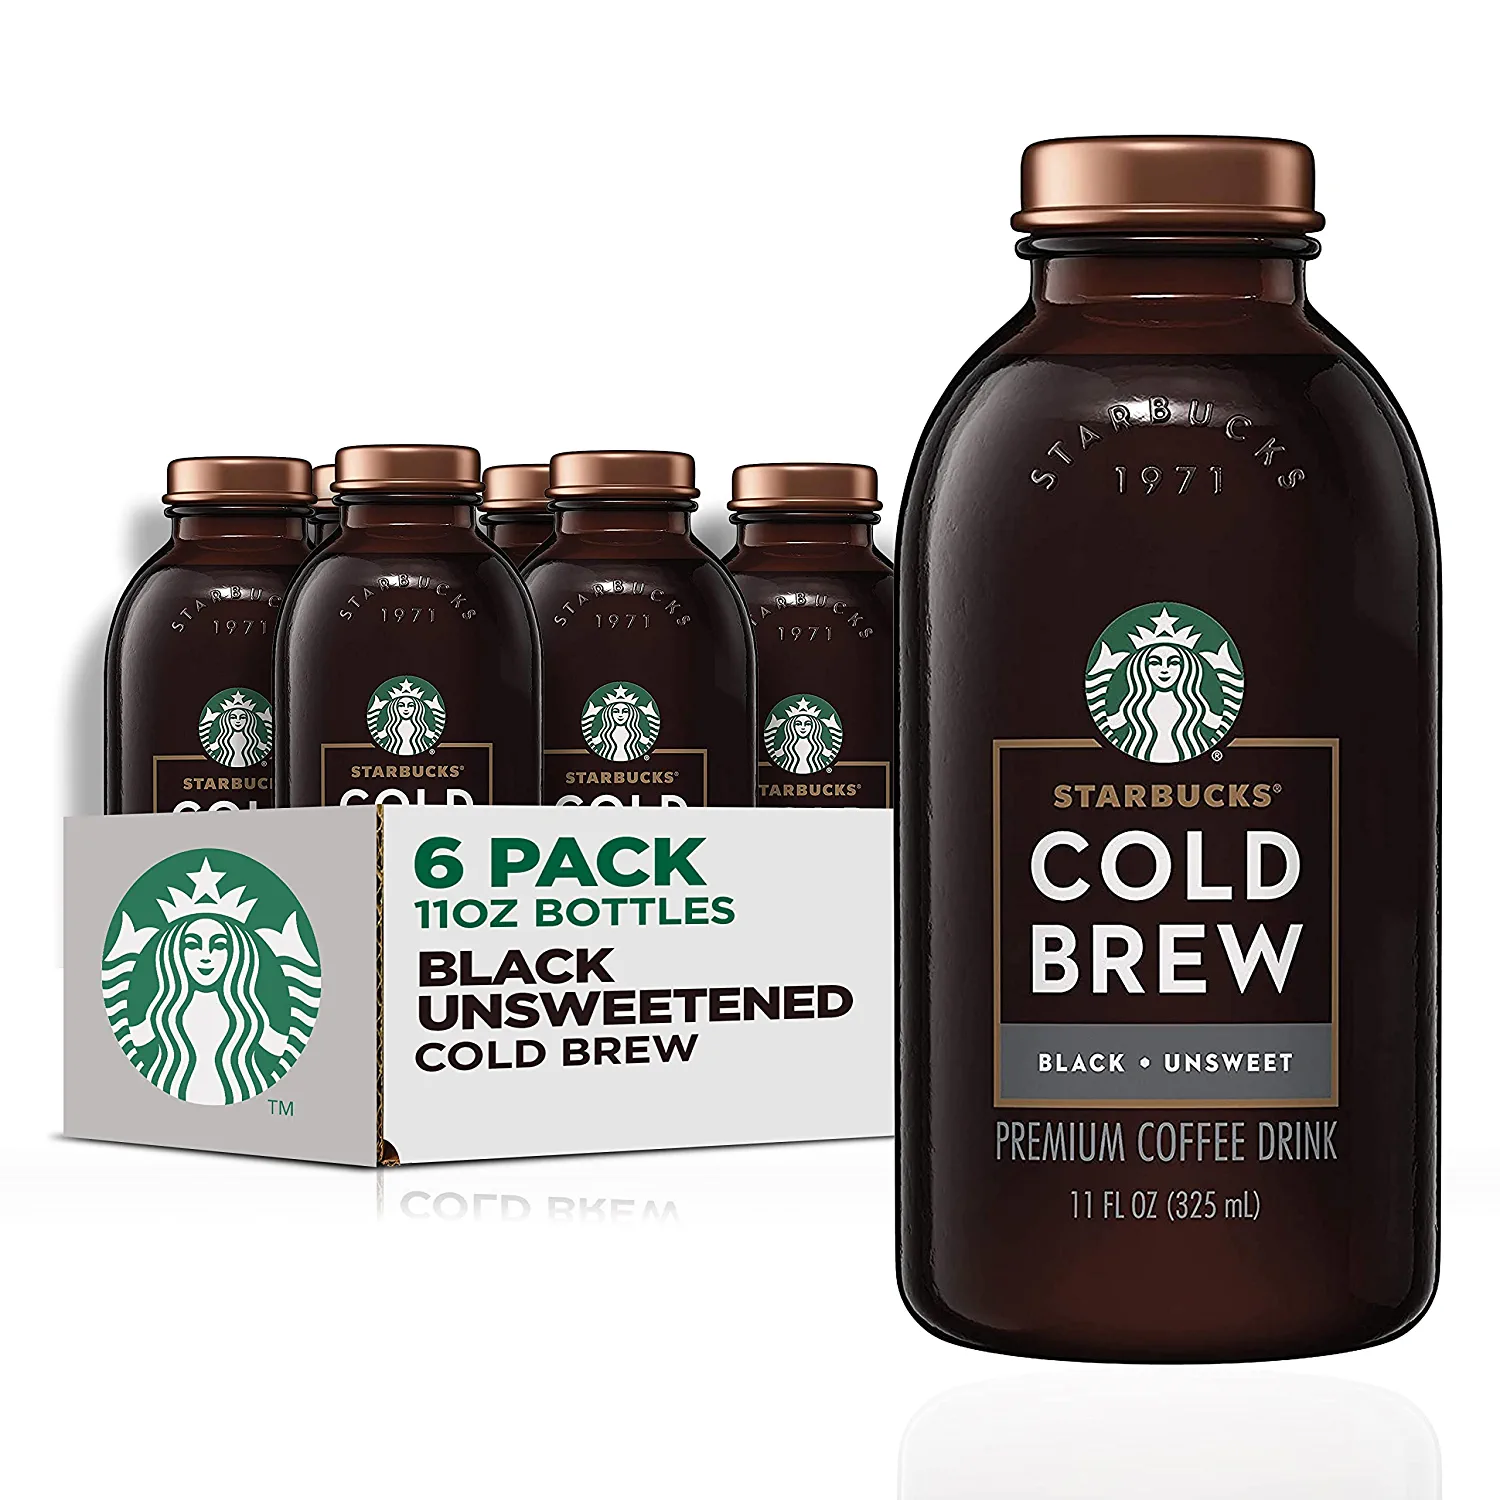 a bottle of Starbucks Cold Brew Coffee in front of a six pack of bottles.